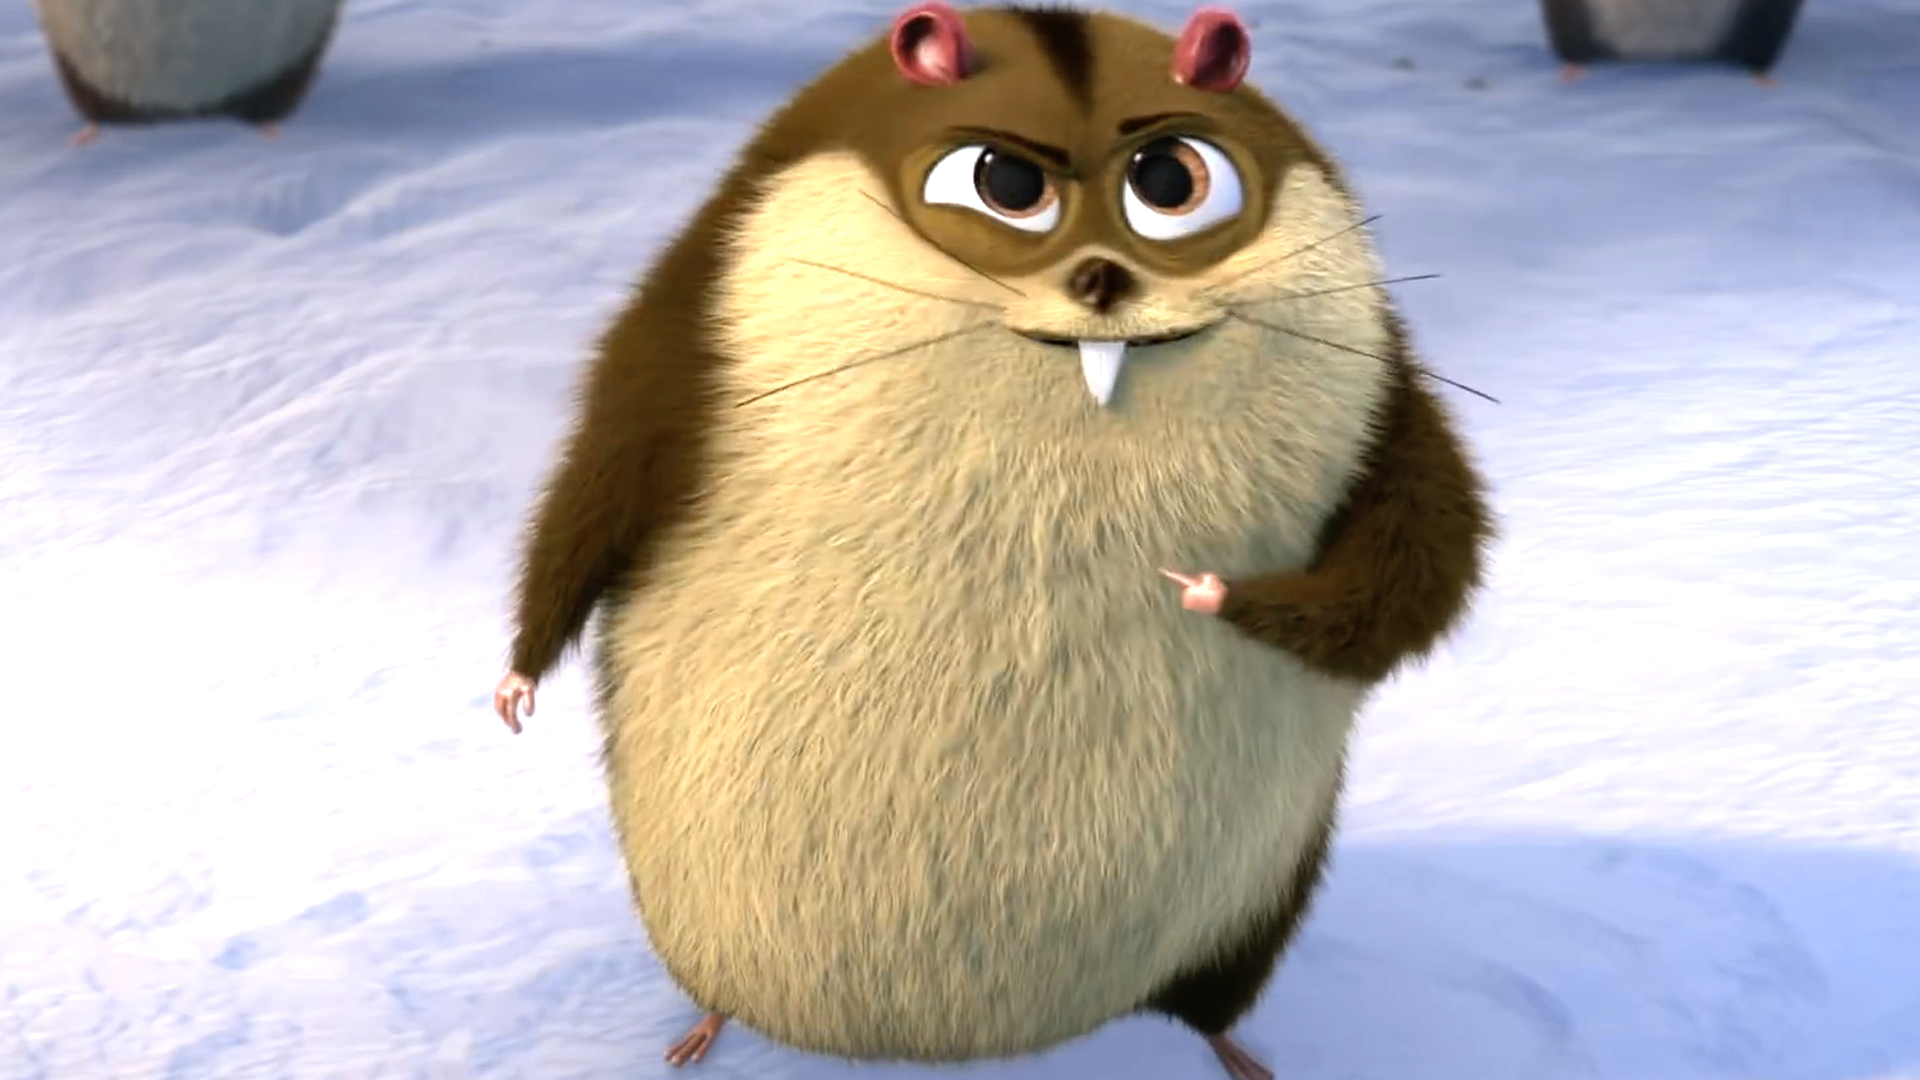 Norm of the North: Norm of the North Movie Clip - Lemmings - Fandango1920 x 1080